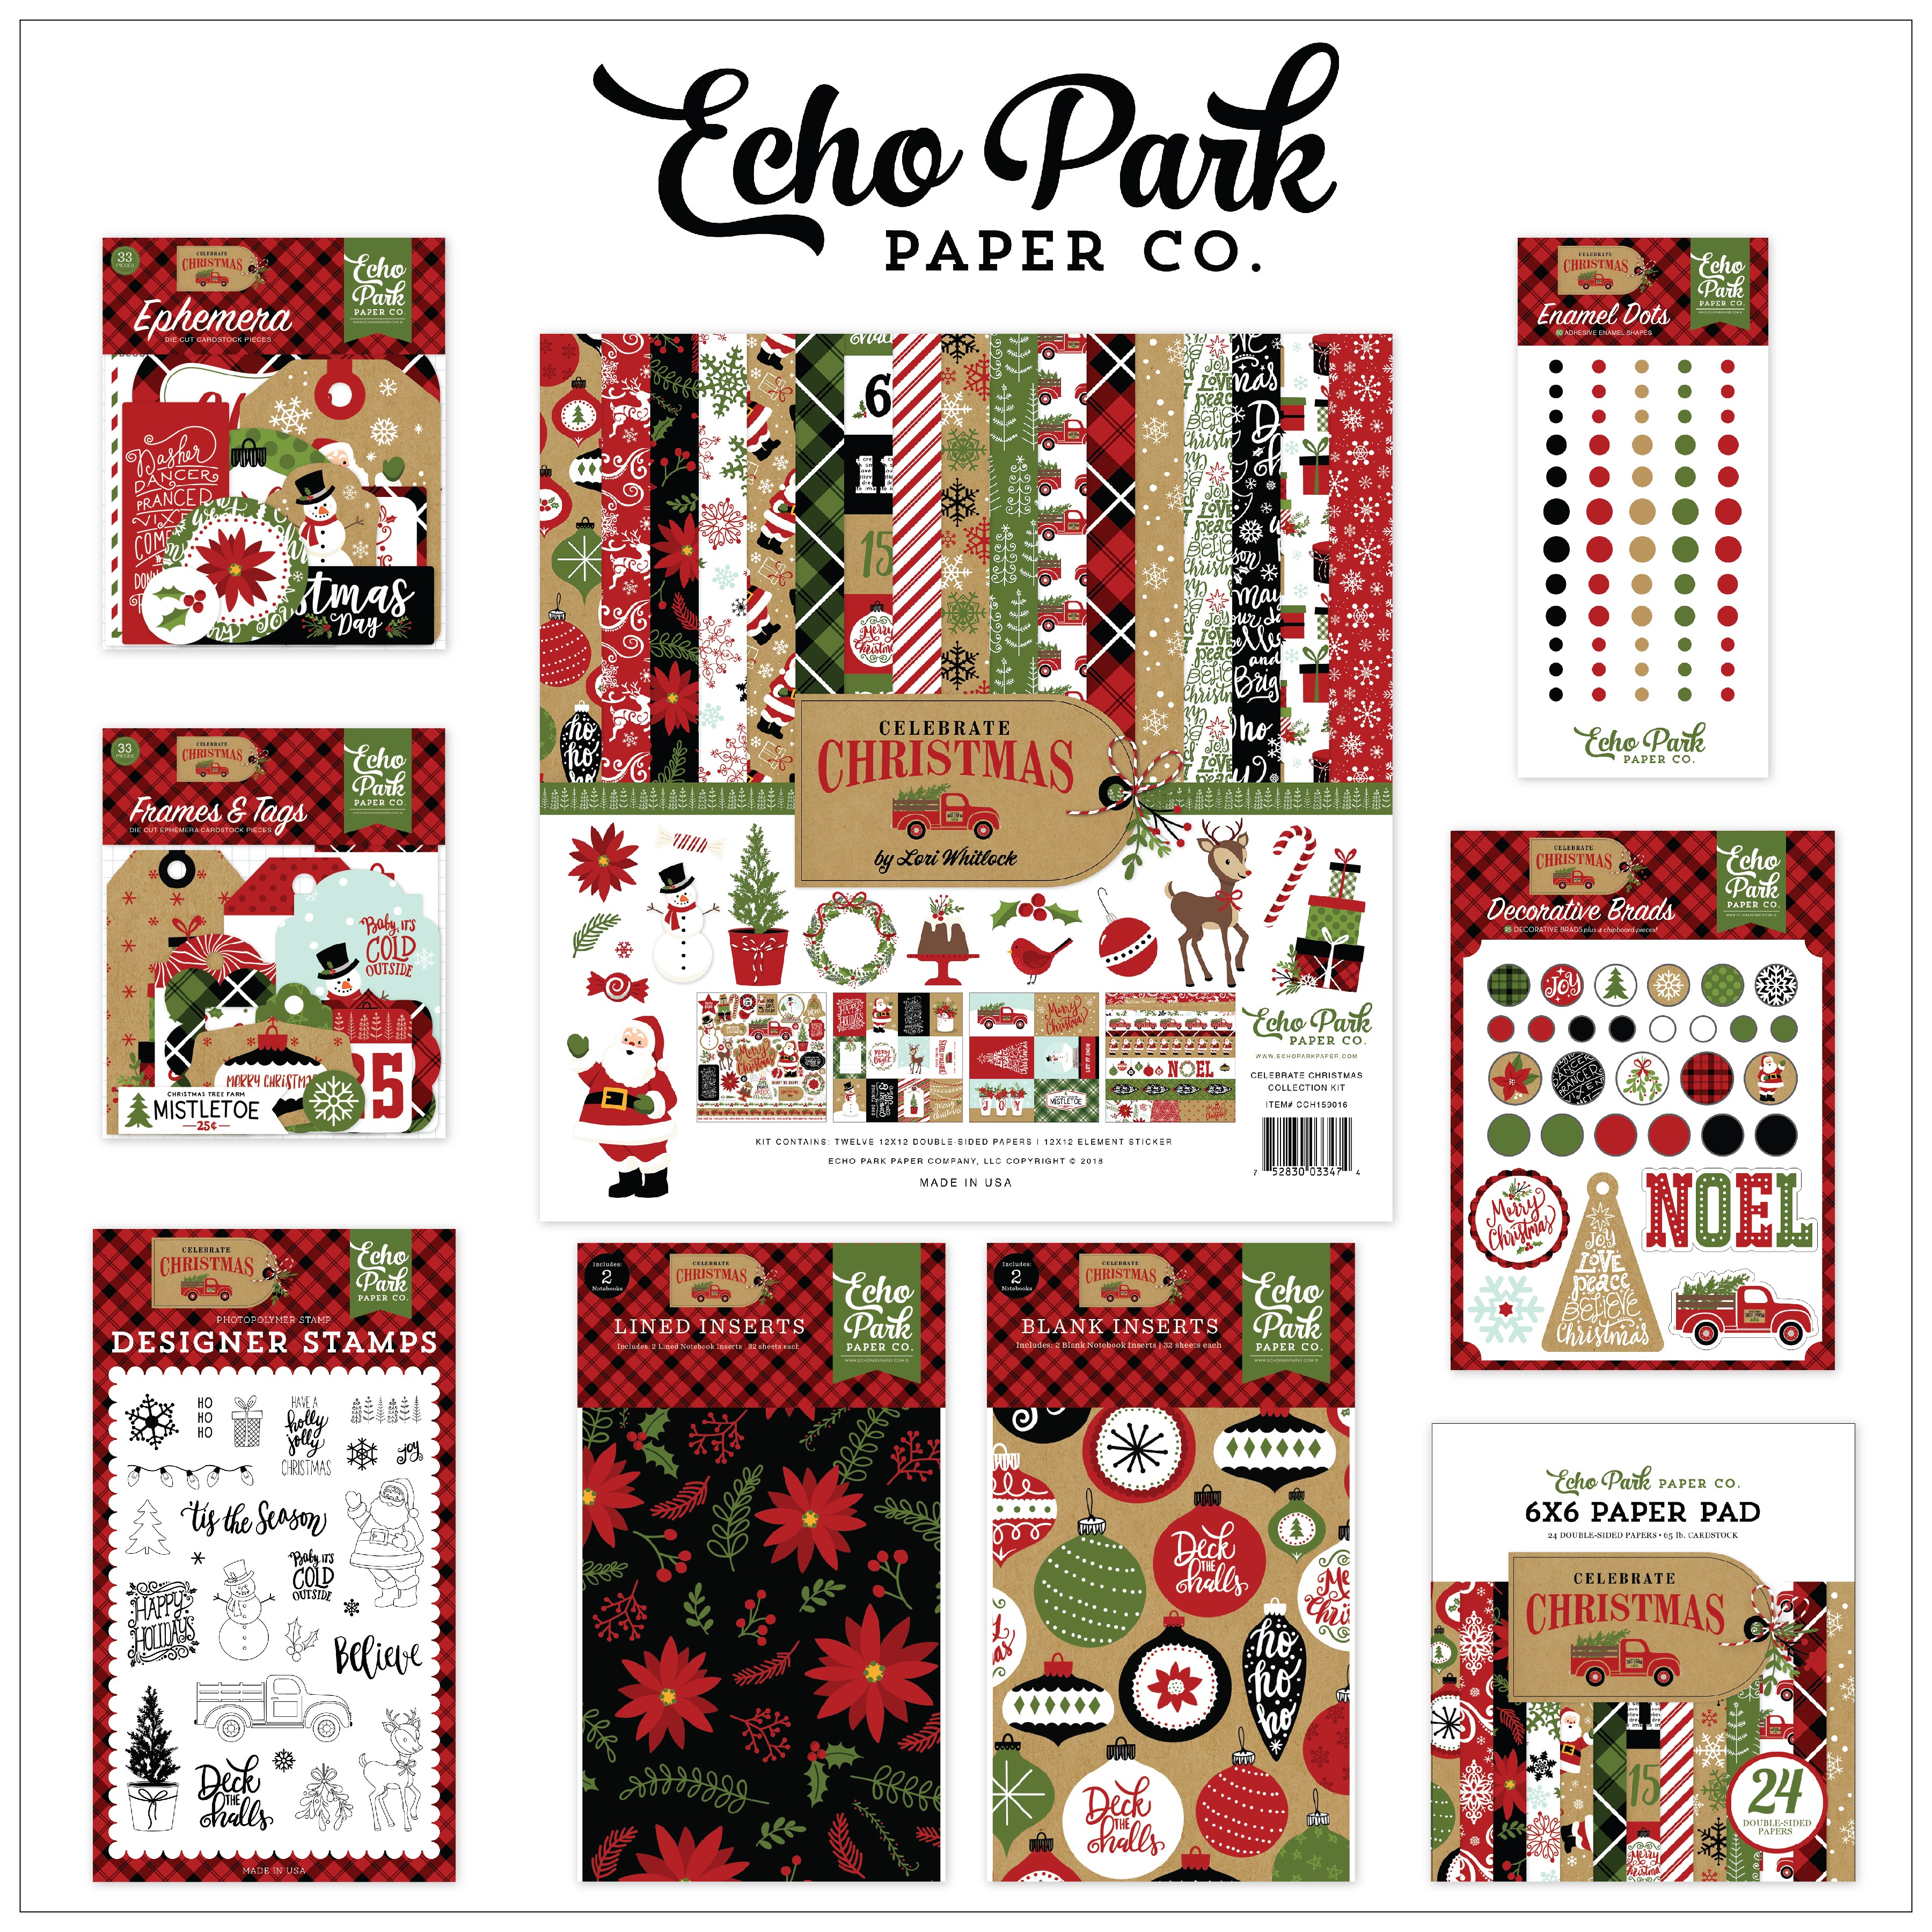 Celebrate Christmas collection by Echo Park Paper Co. | Creative Scrapbooker Magazine Giveaway